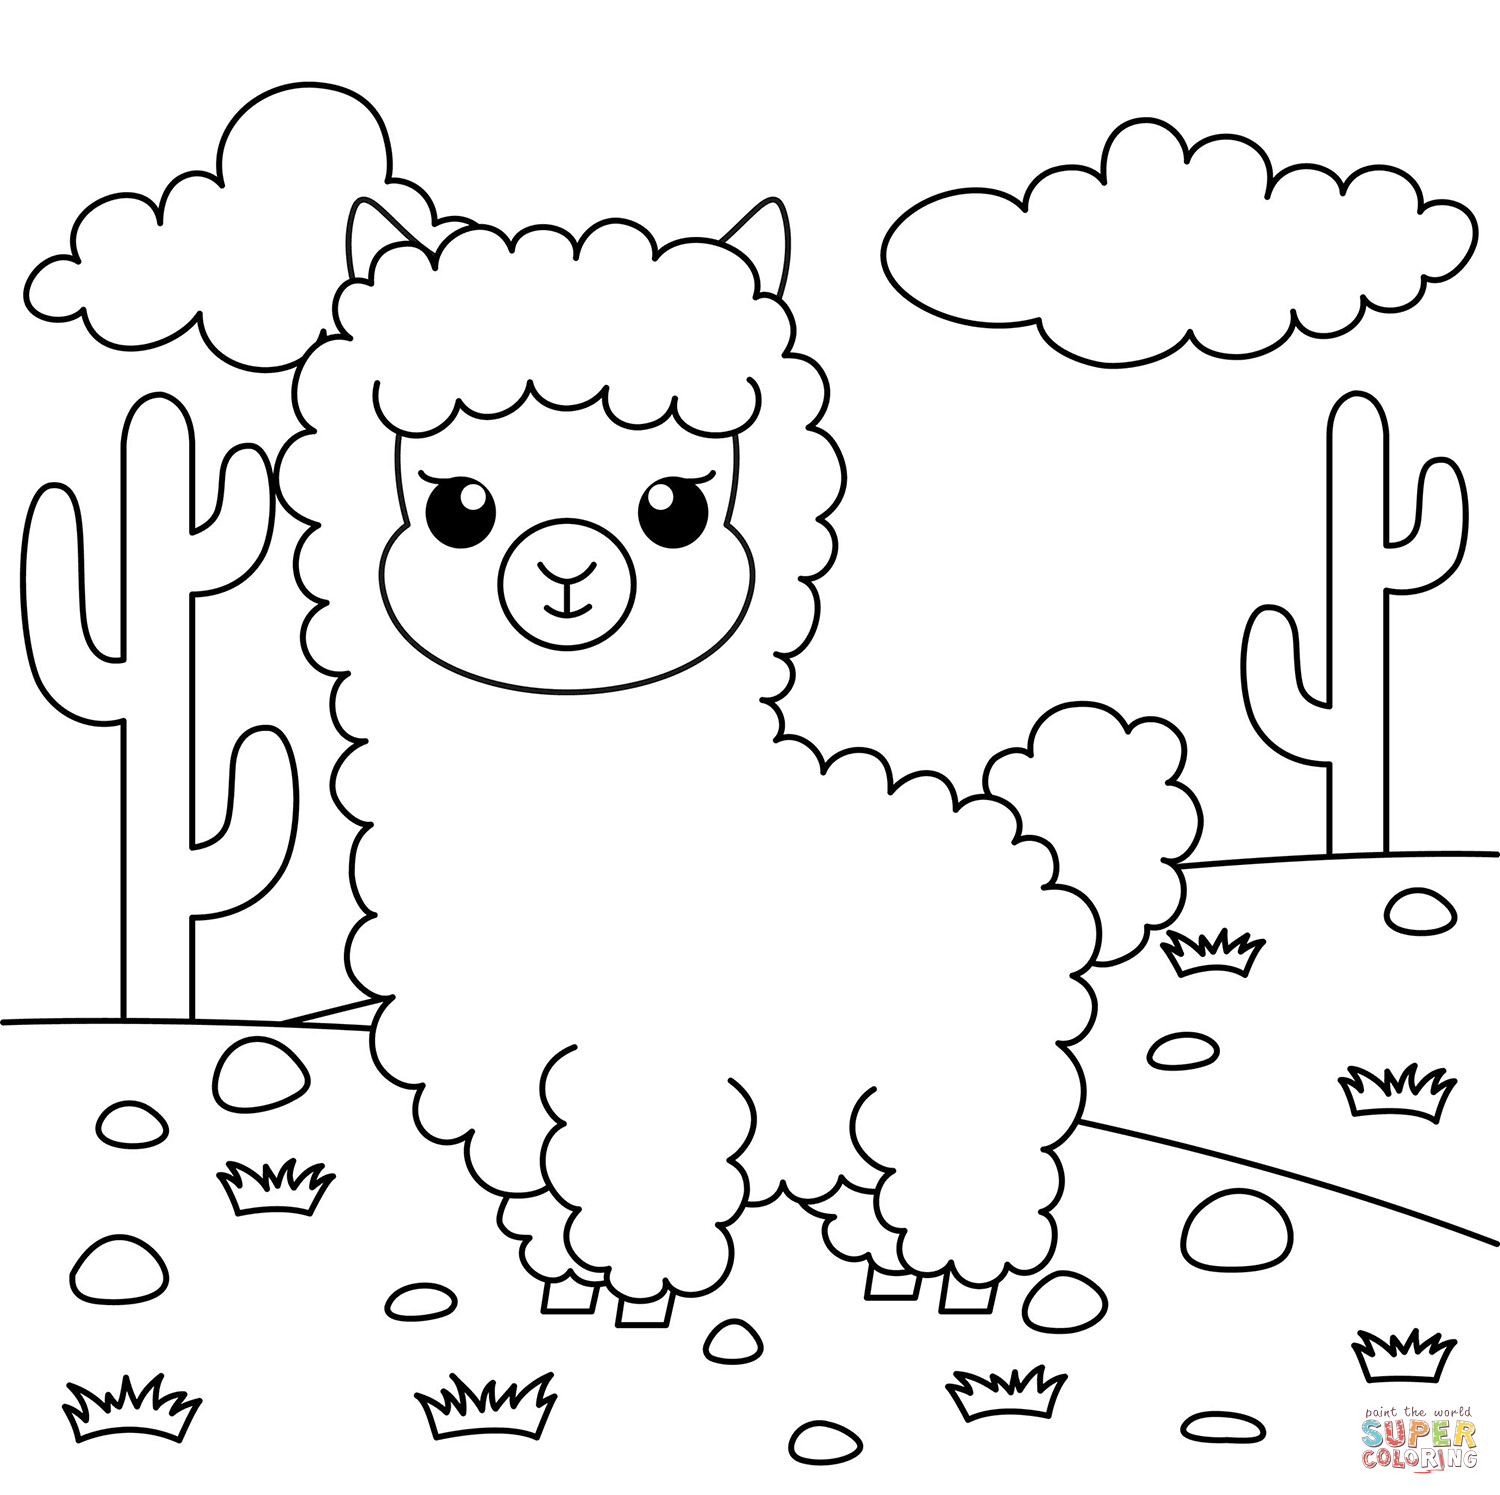 Cute Llama coloring page | Free Printable Coloring Pages